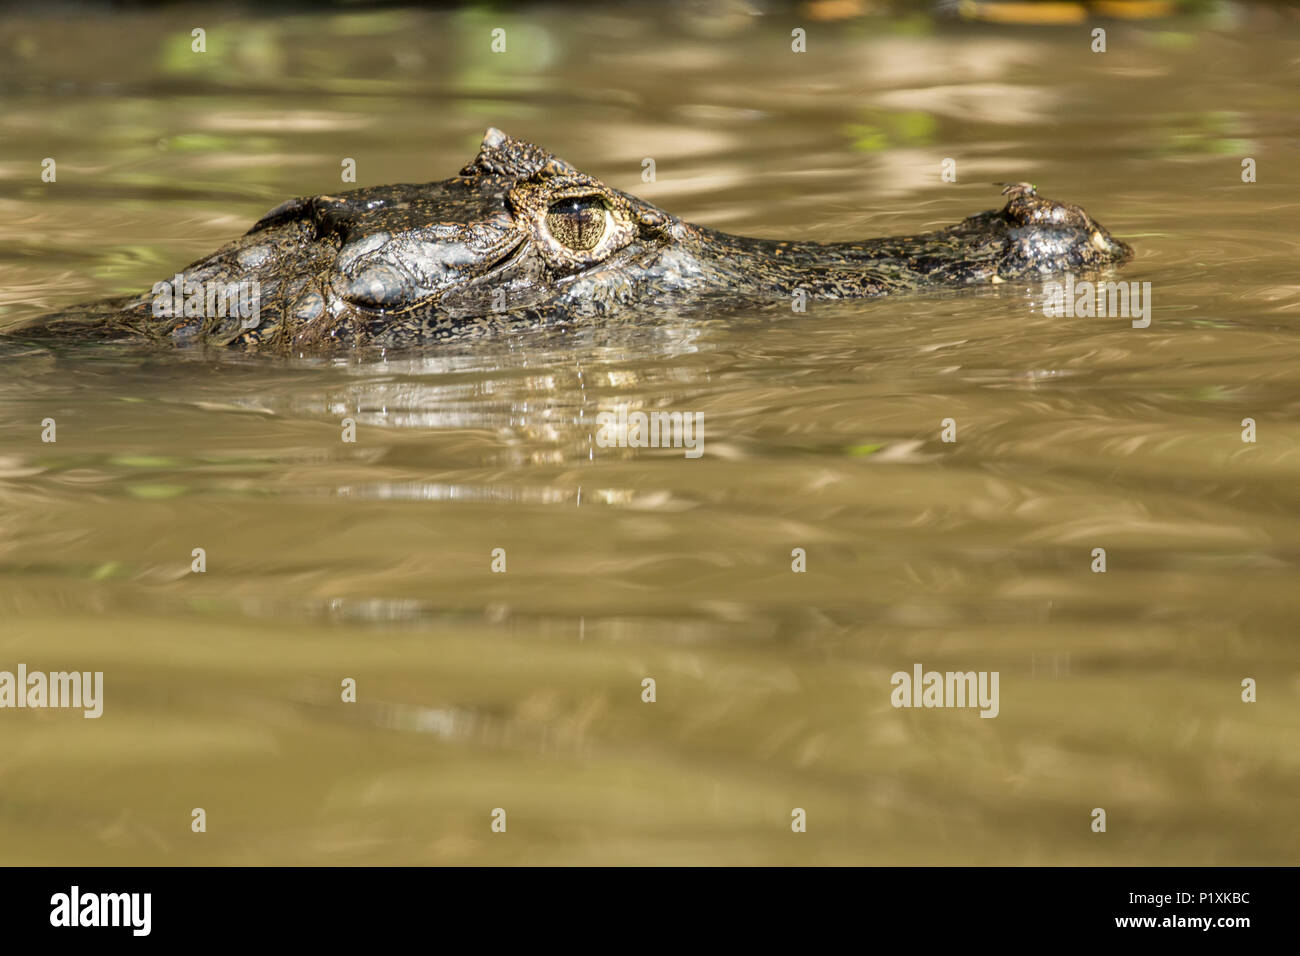 Spectacled Caimans inhabit Central and South America. They are relatively small sized crocodilians, with an average maximum weight of 6 to 40 kg (13 t Stock Photo